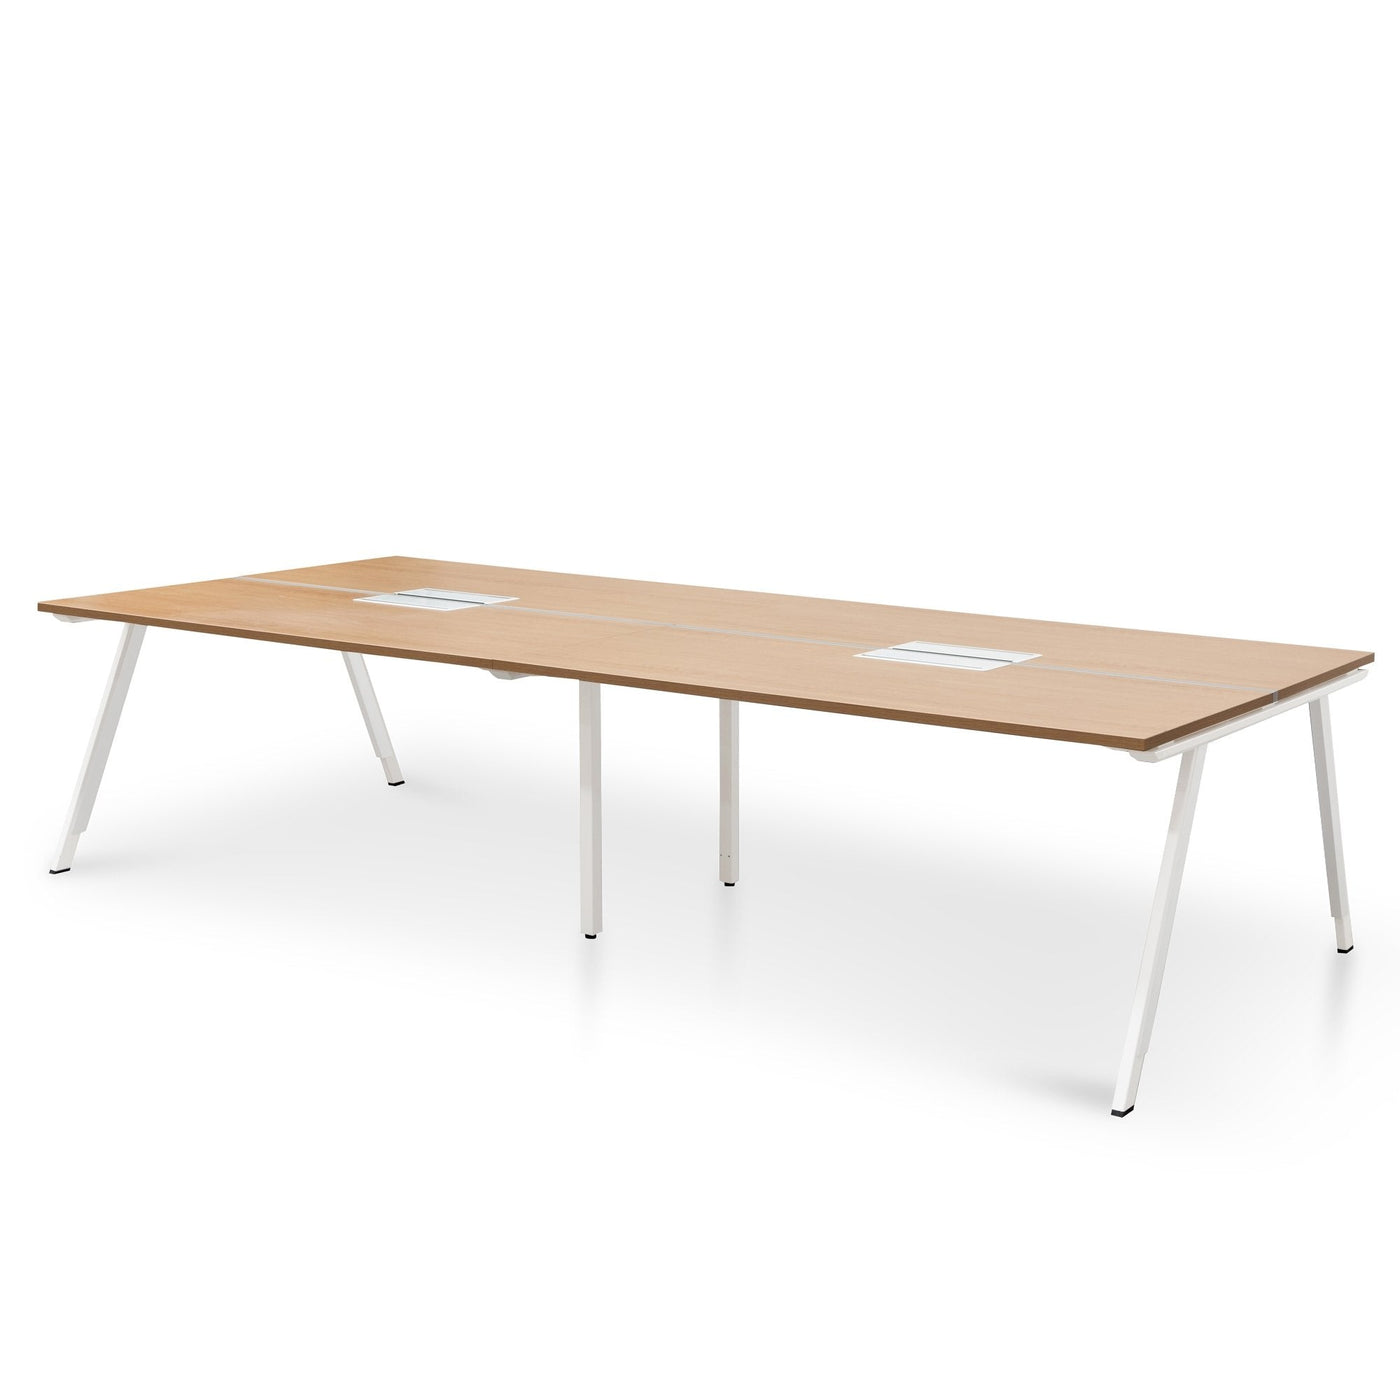 4 Seater 3.2m Office Desk - Natural